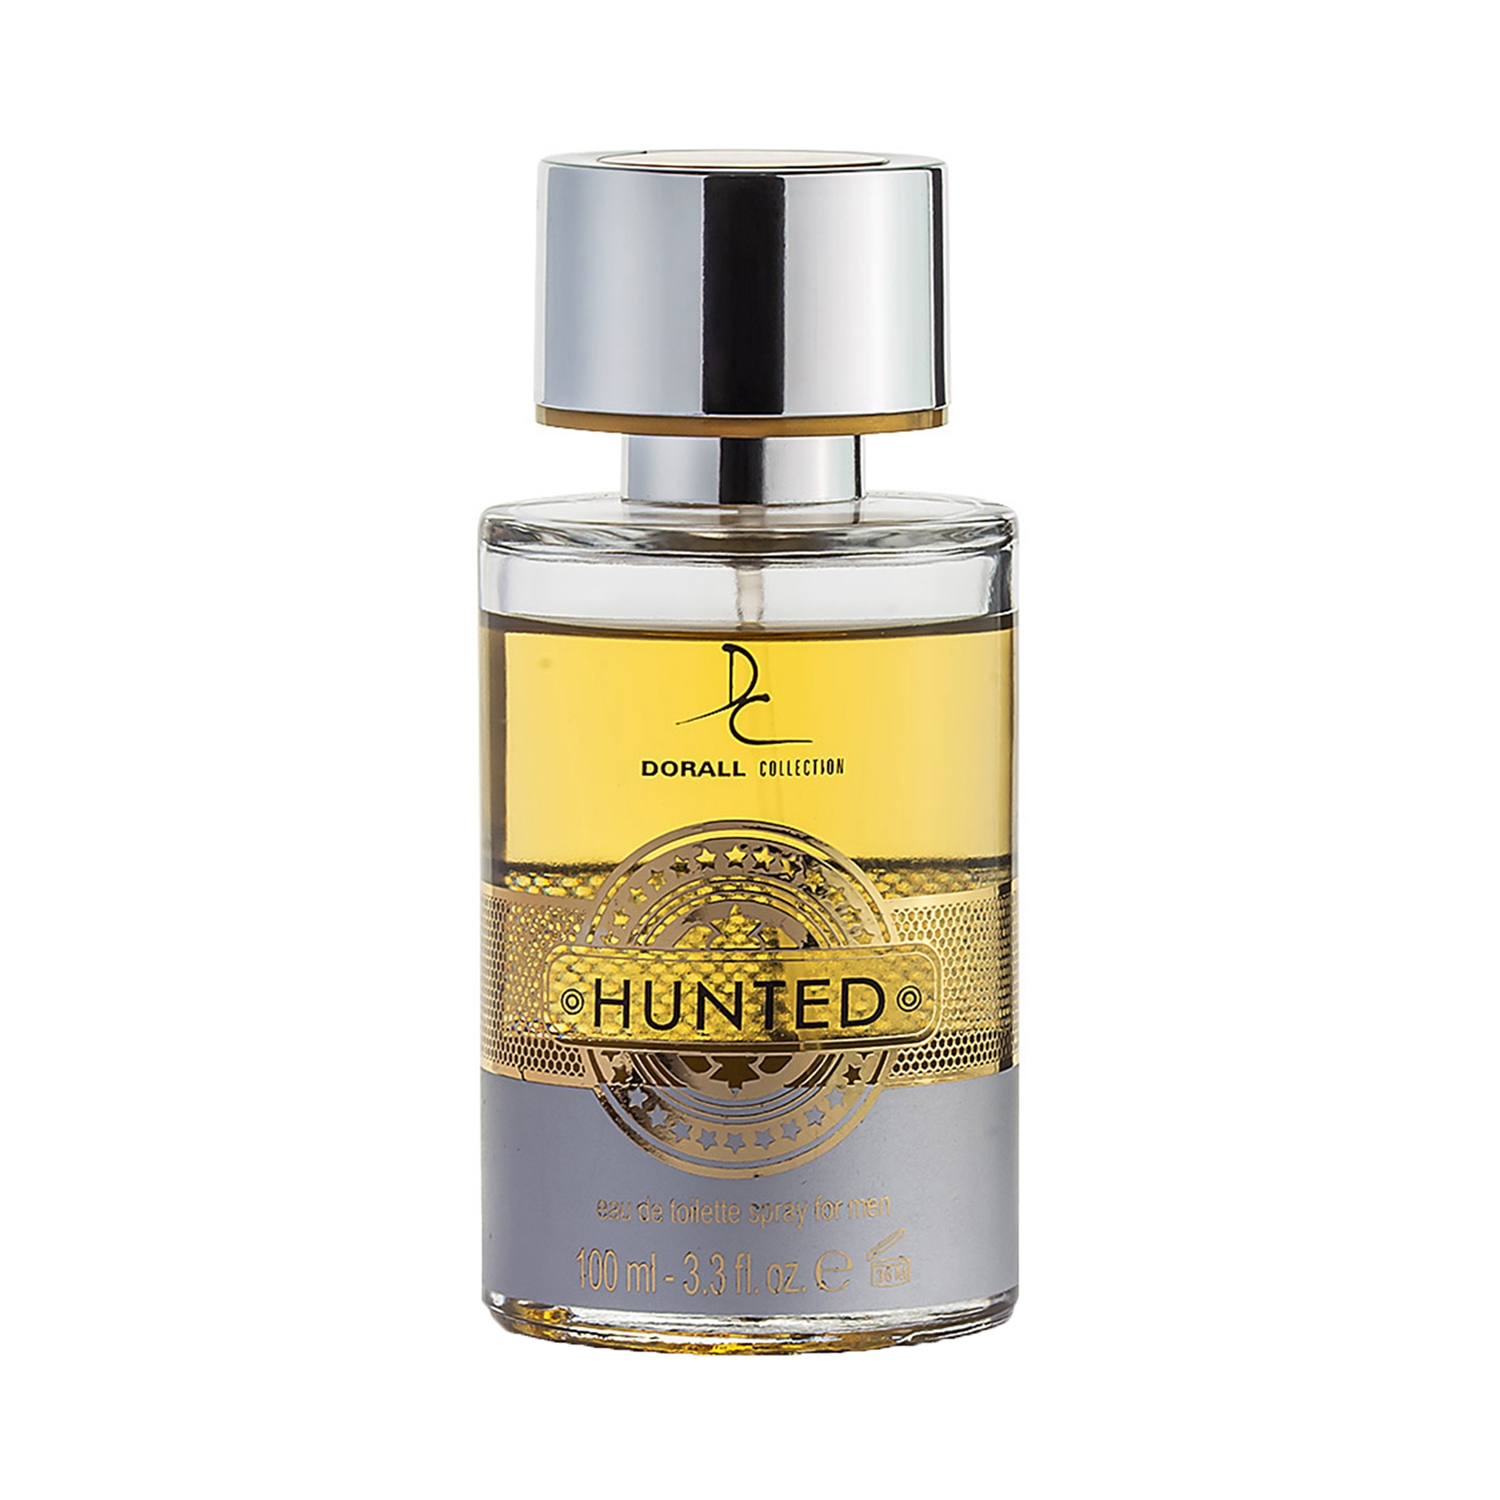 Dorall Collection | Dorall Collection Hunted Eau De Toilette (100ml)